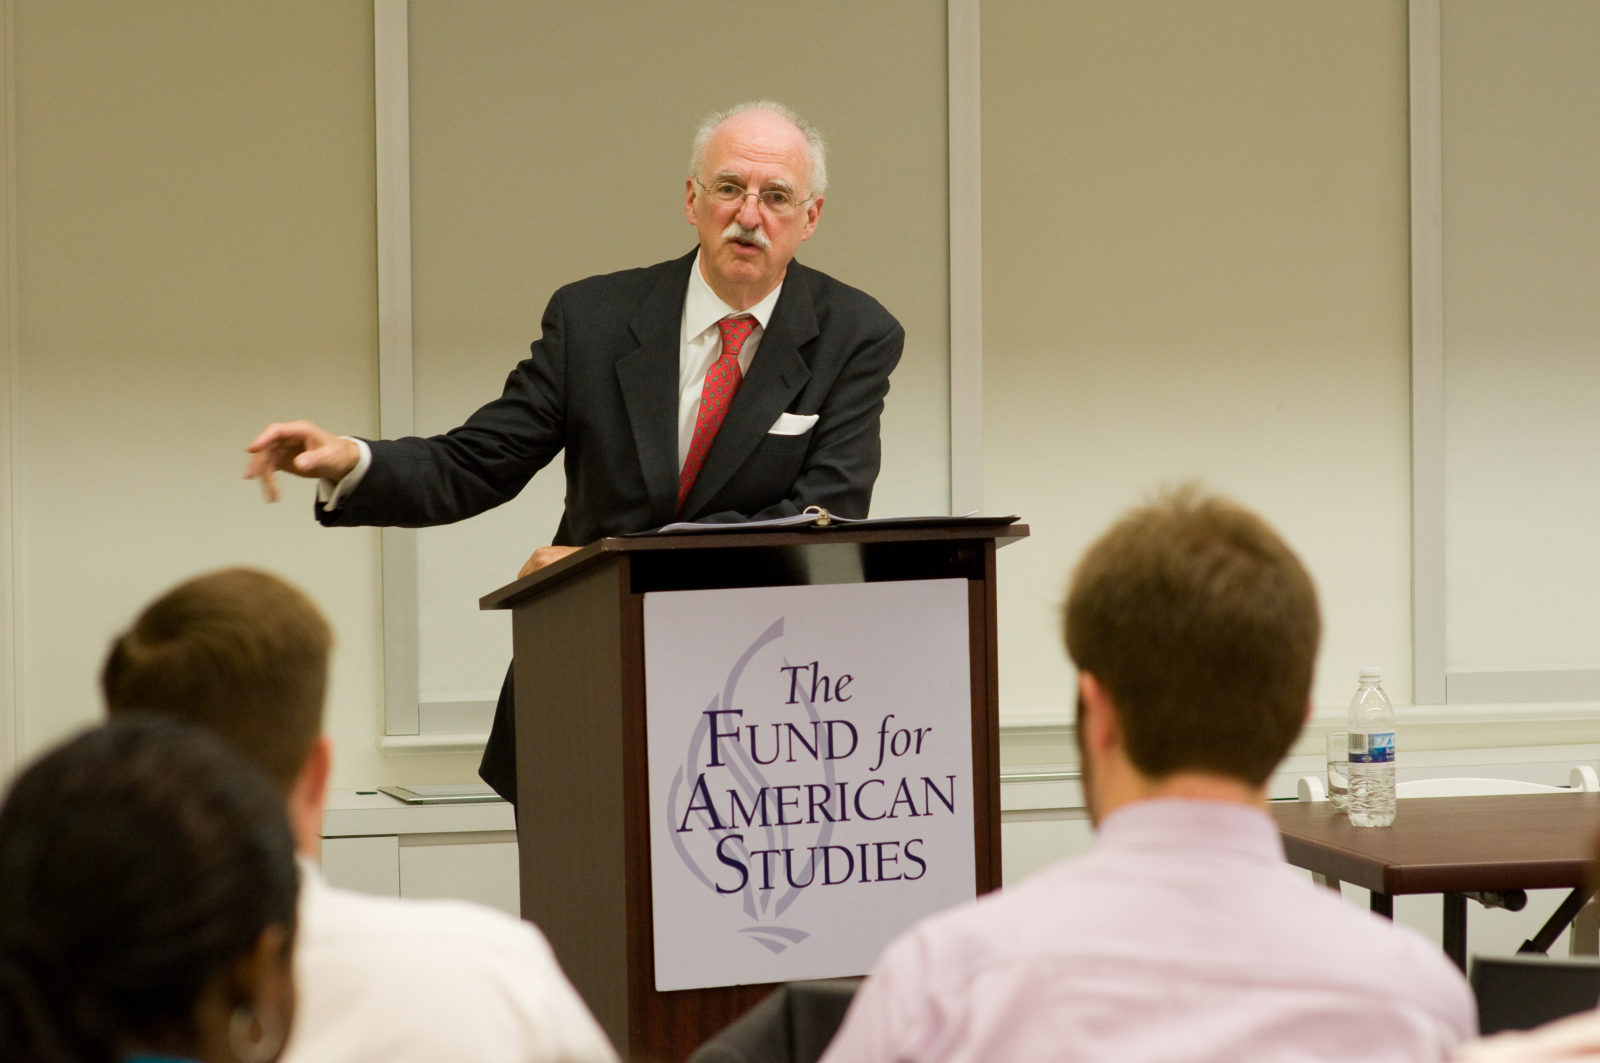 Doug Ginsburg, judge on the United States Court of Appeals, spoke to LSI students on June 16 in the new TFAS building, the Center for Teaching Freedom.